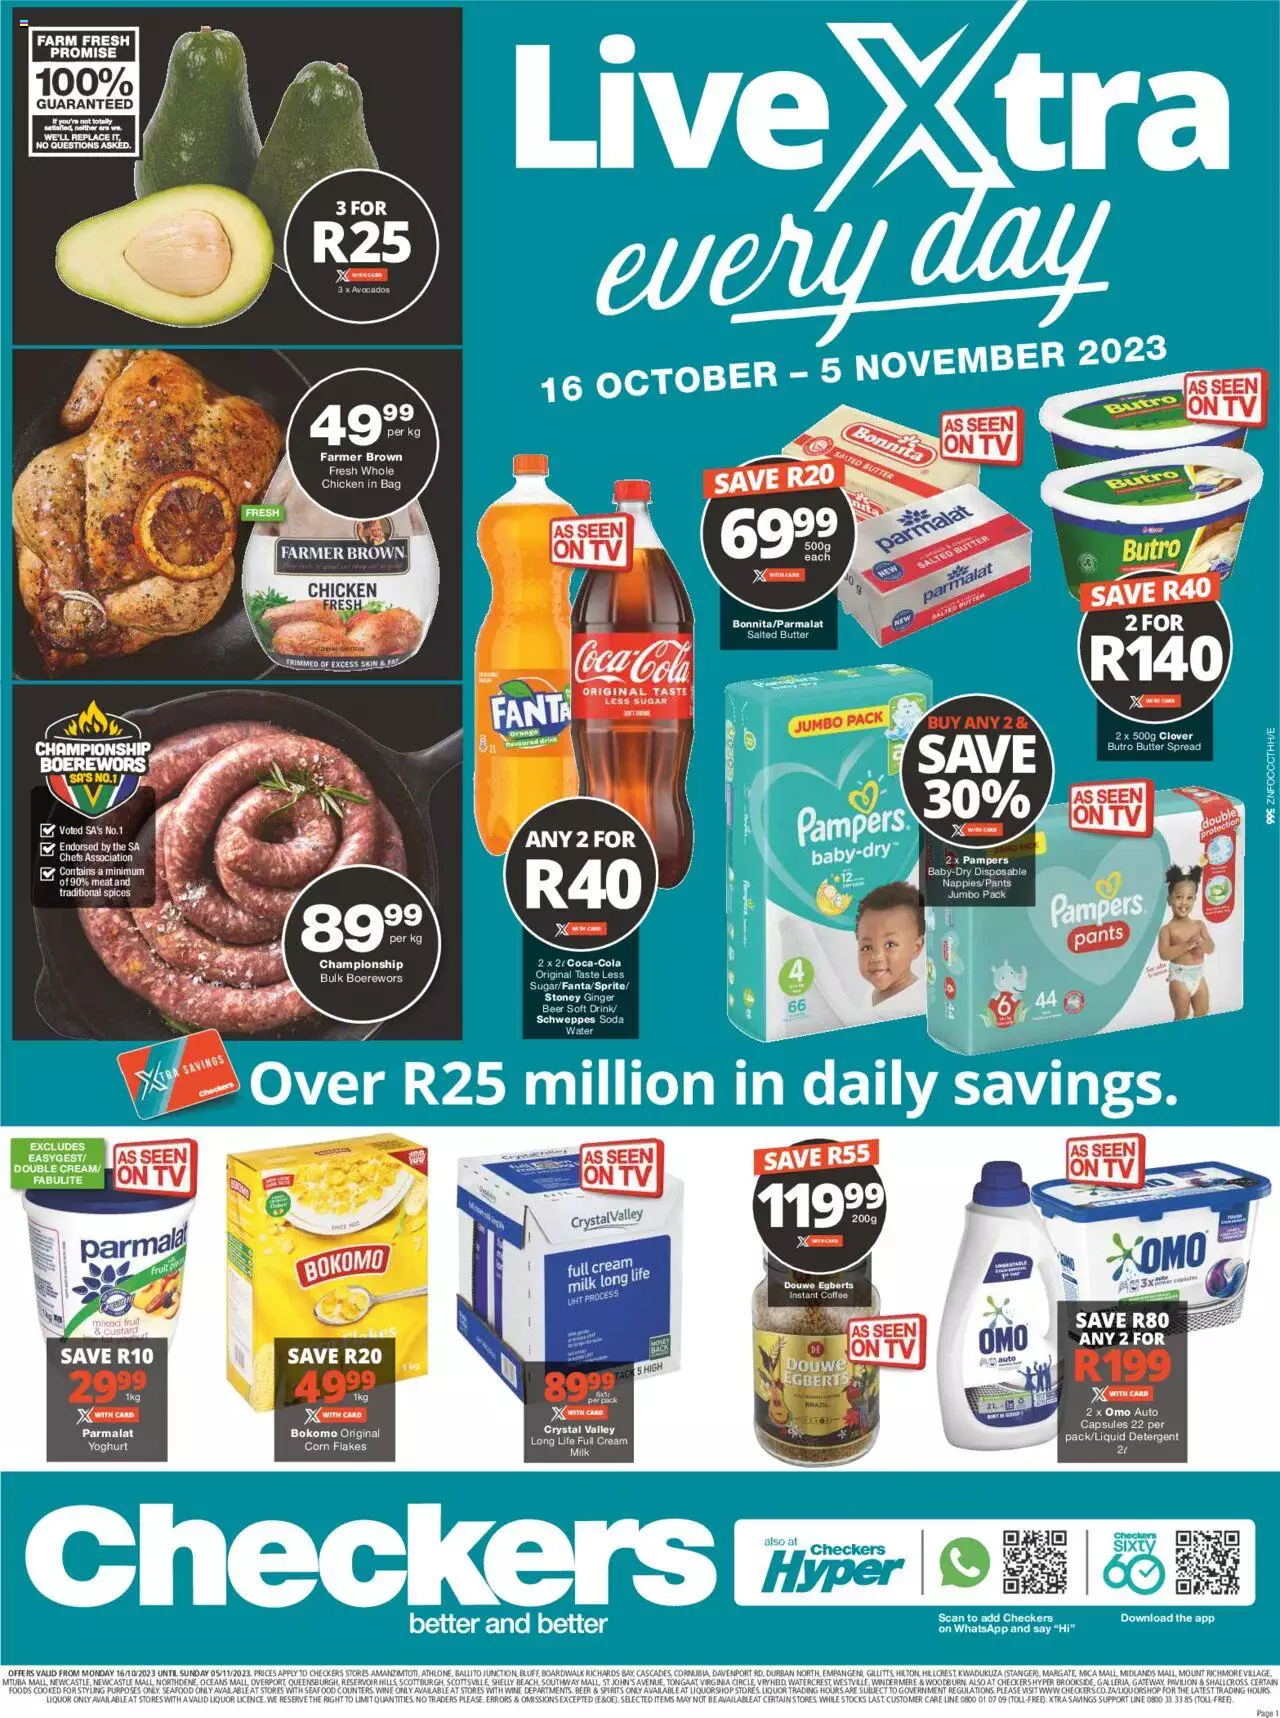 Checkers Specials October Month-End Promotion 2023